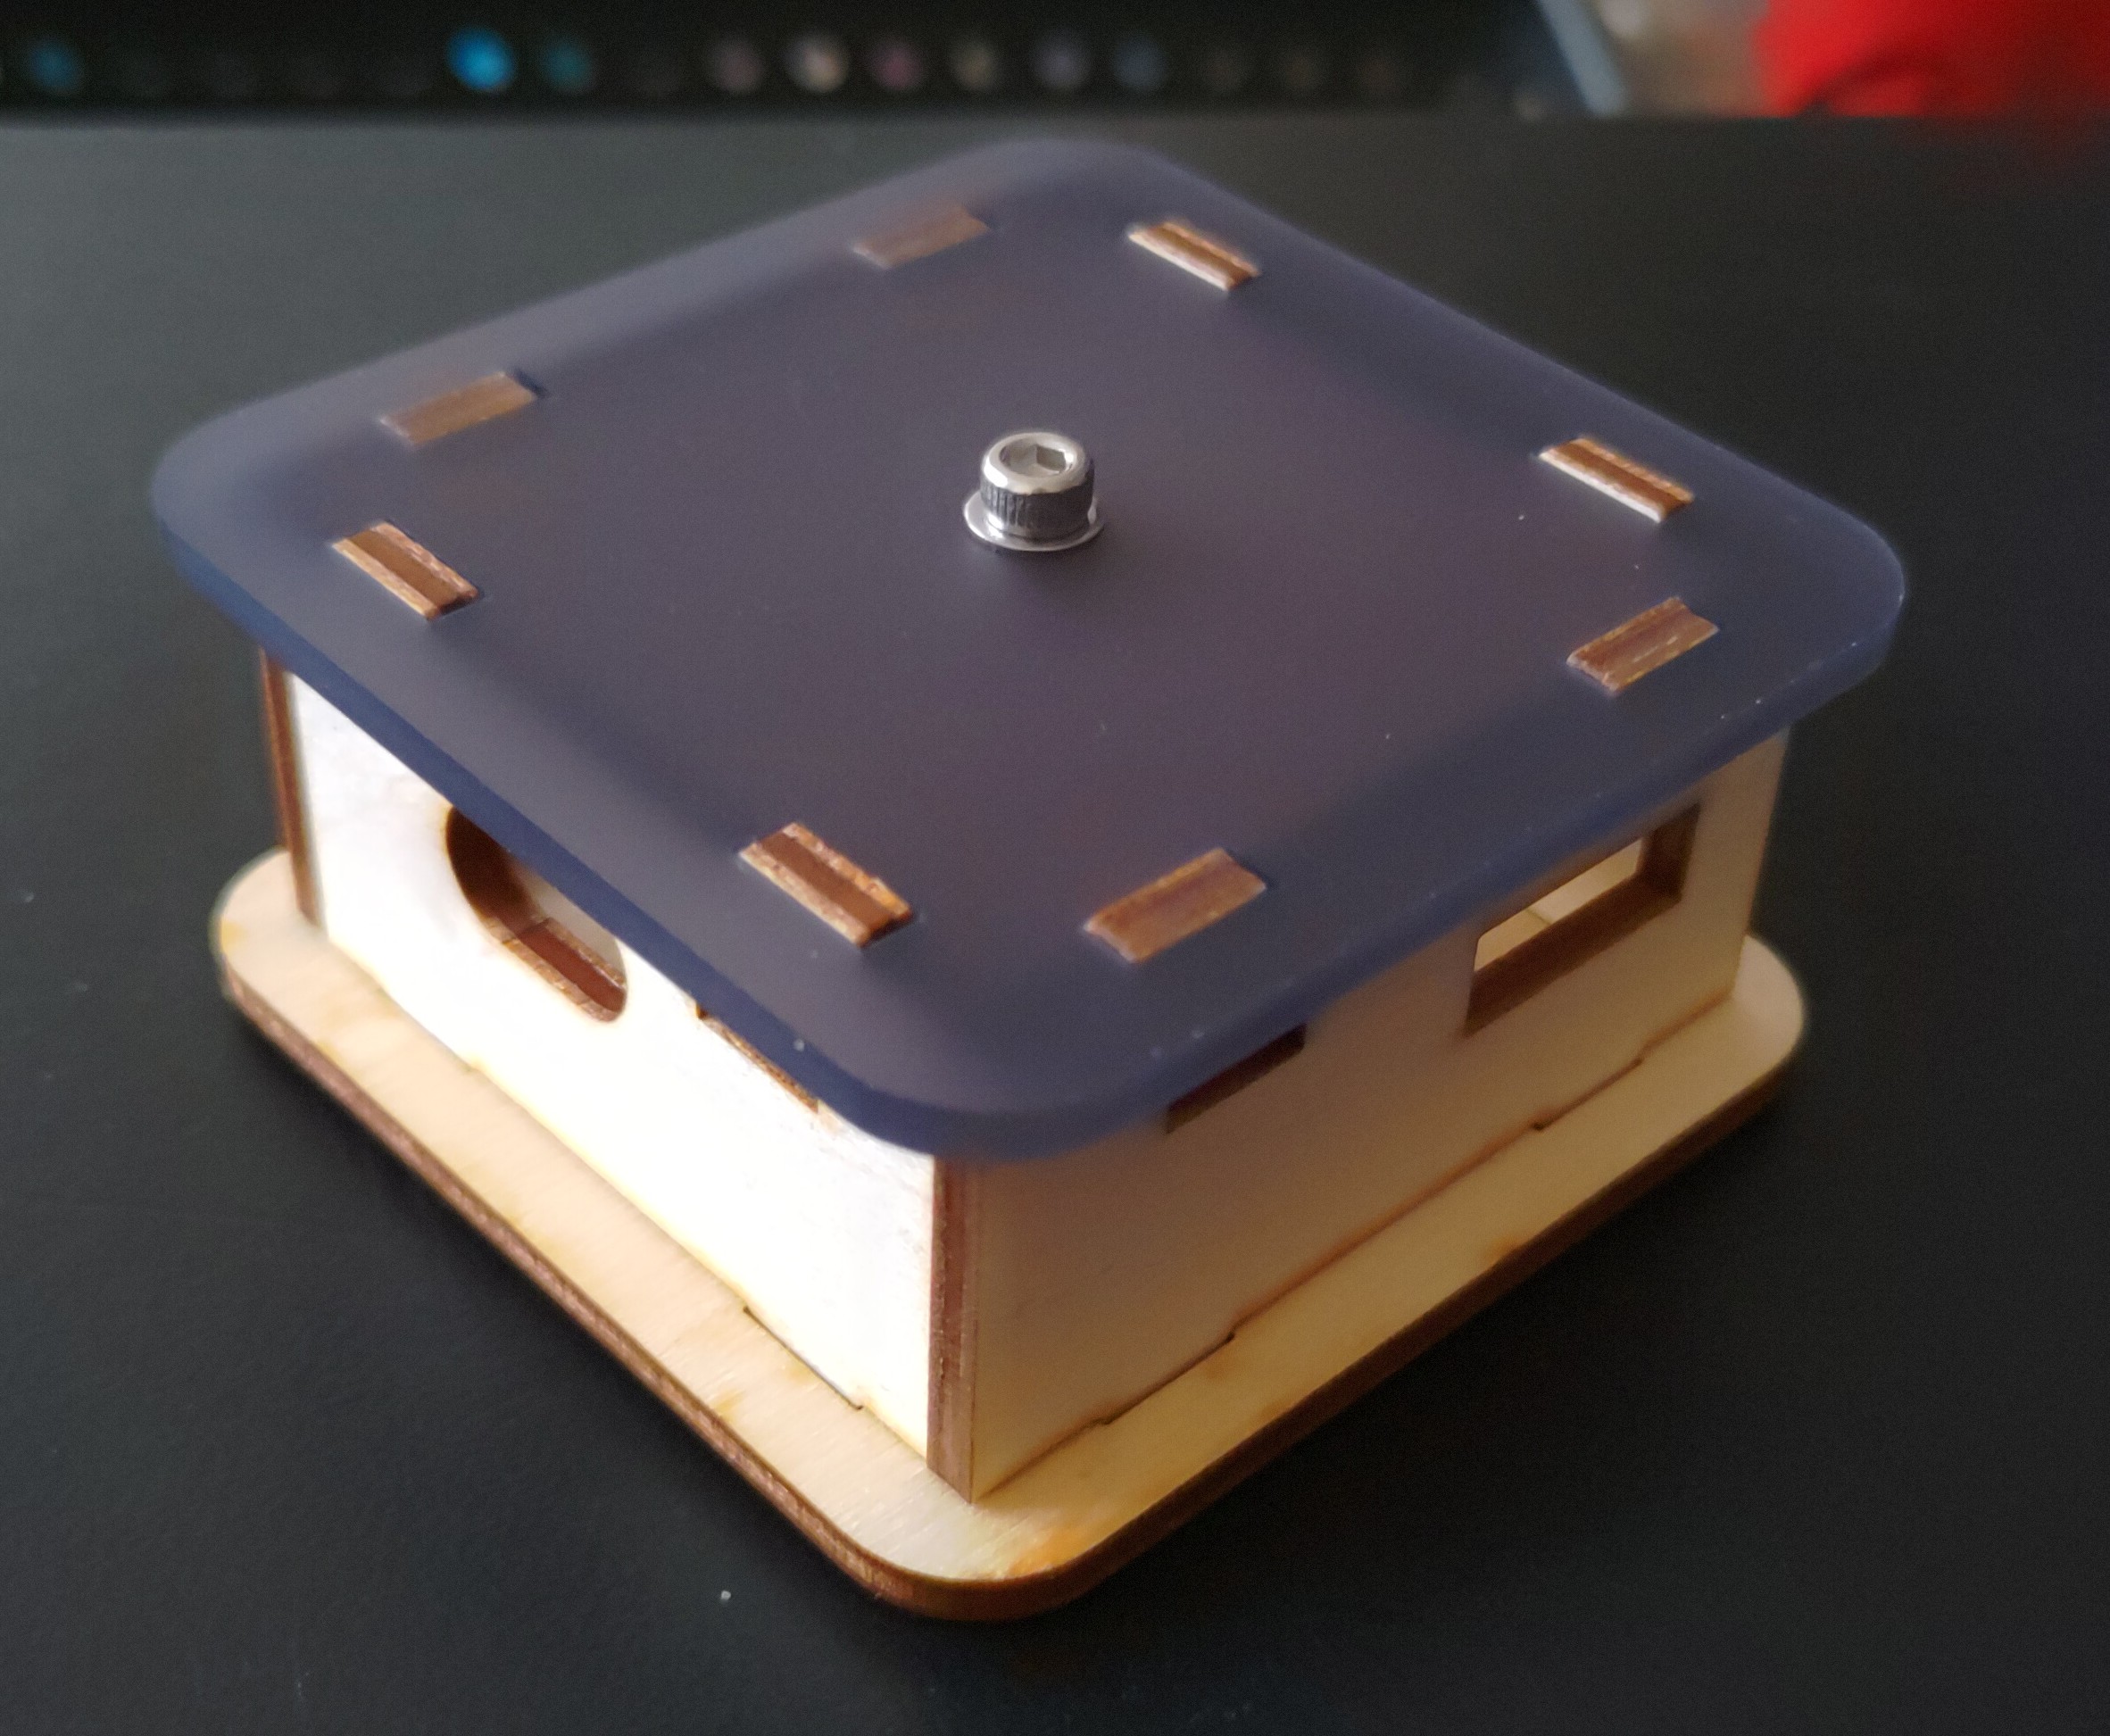 The same laser cut case as previously shown, but with a dark acrylic lid, rather than a wooden lid